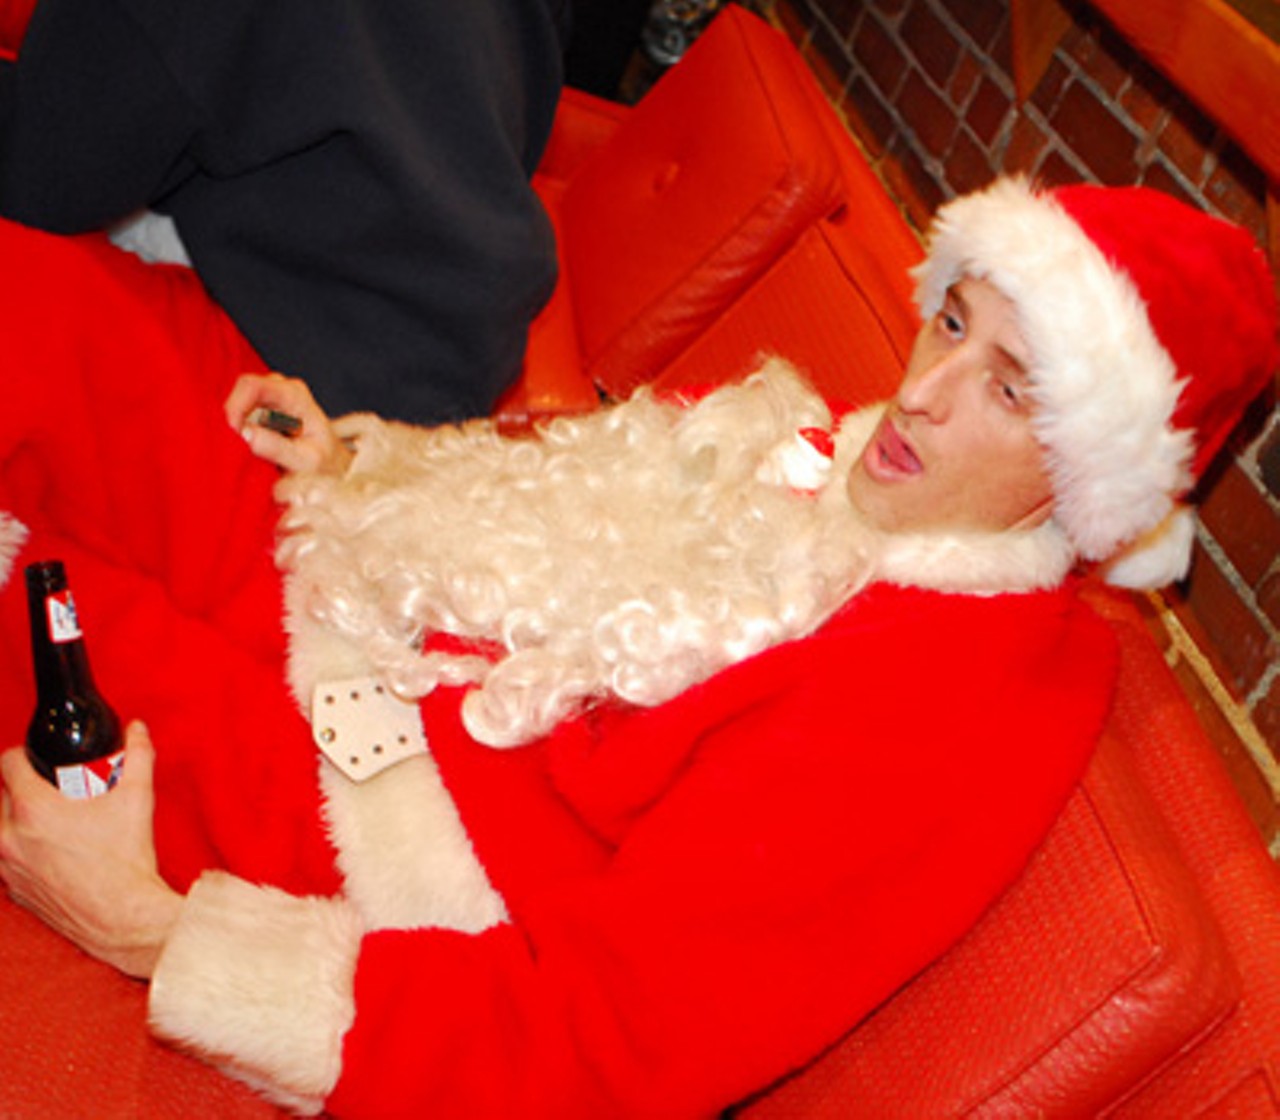 Gabriel "Clause" slides low in his seat, but still holds on to his beer.